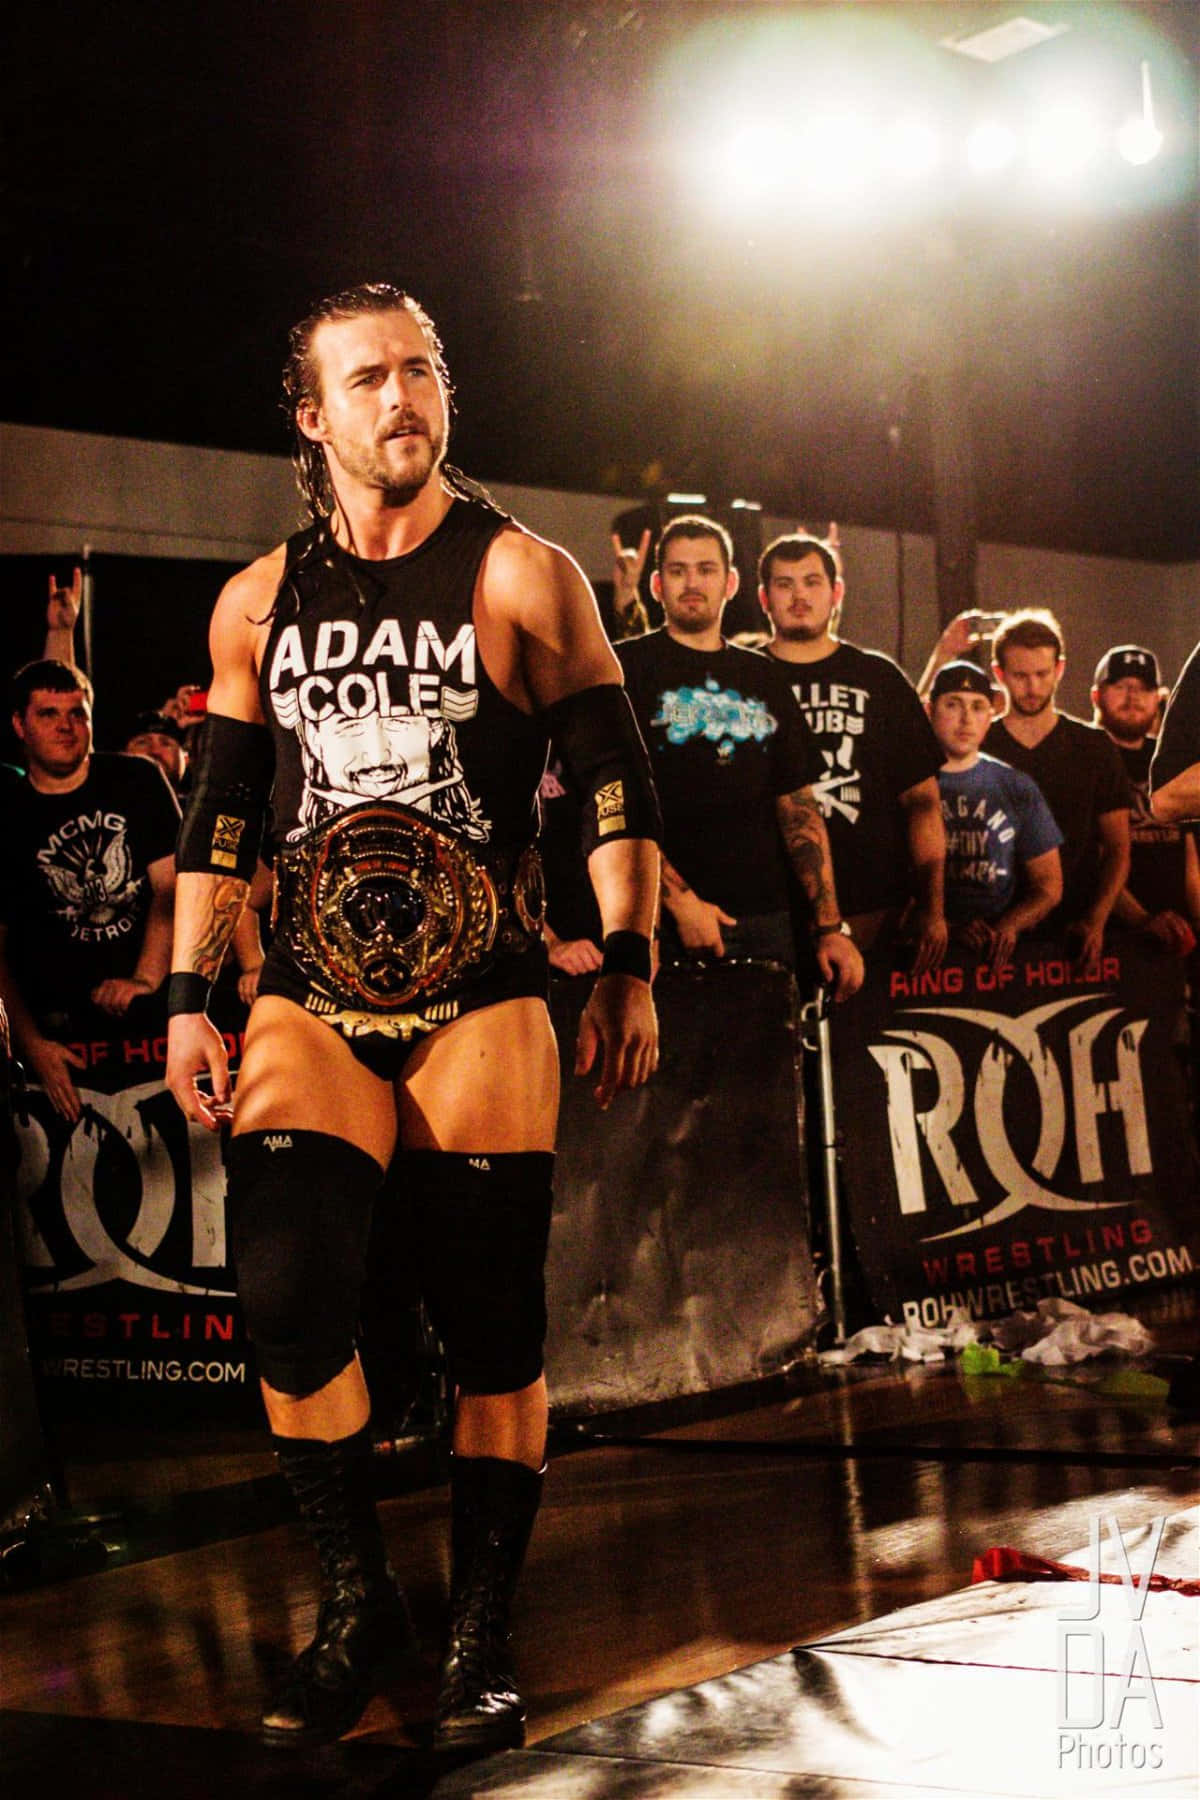 Adamcole Med Sina Supporters. Wallpaper